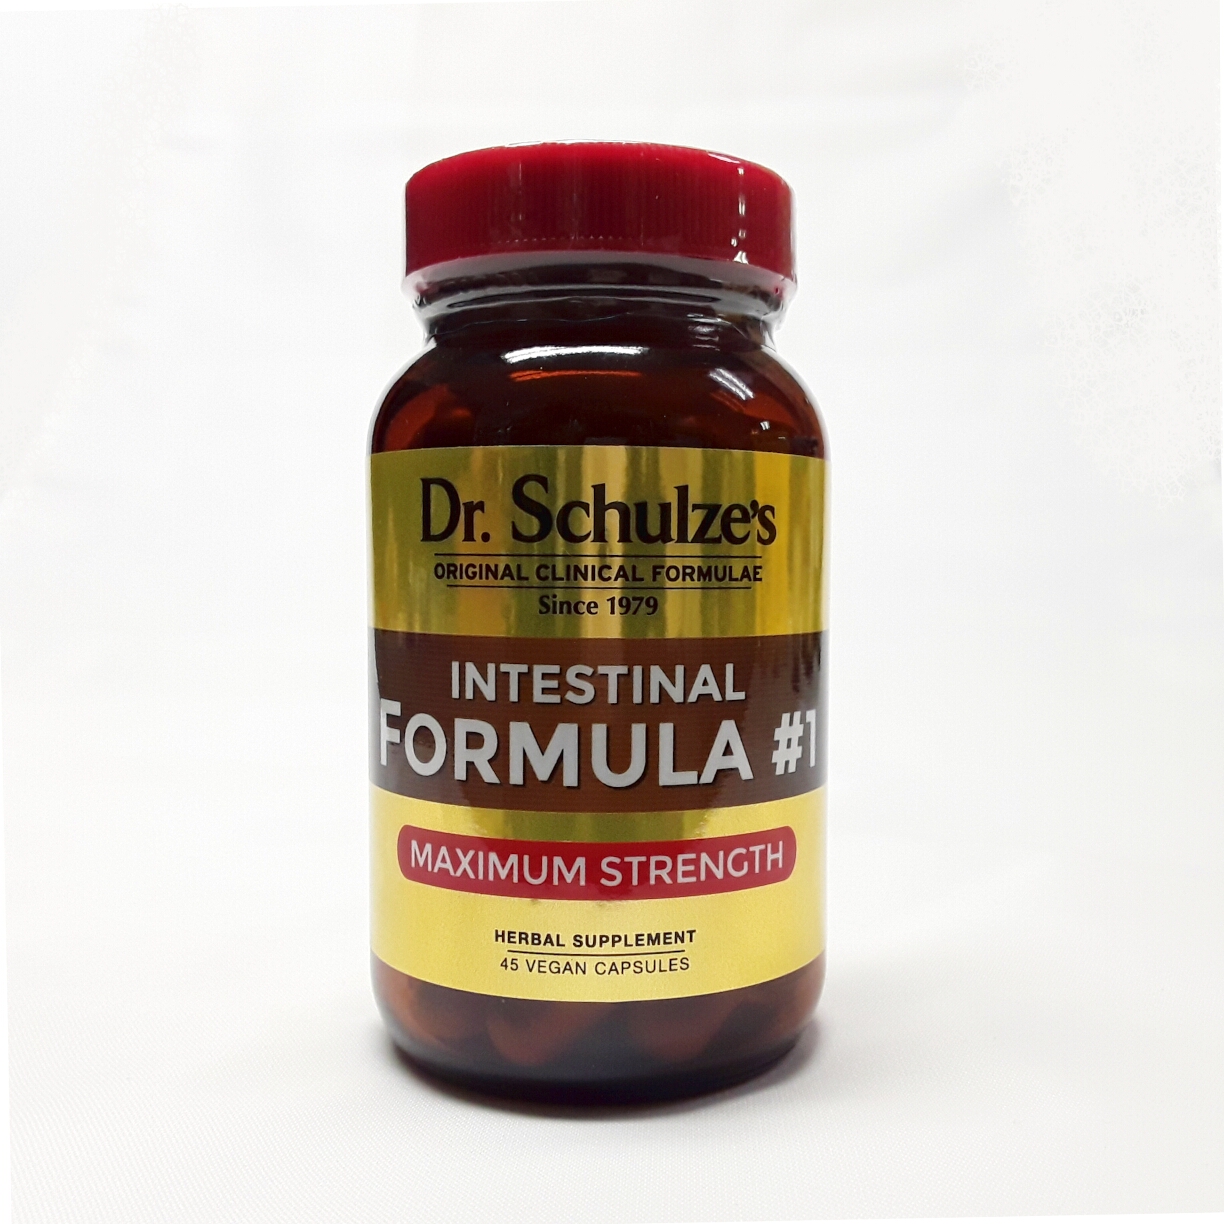 Dr Schulzes Intestinal Formula 1 MAX Strength Capsules Website Product Image View 1